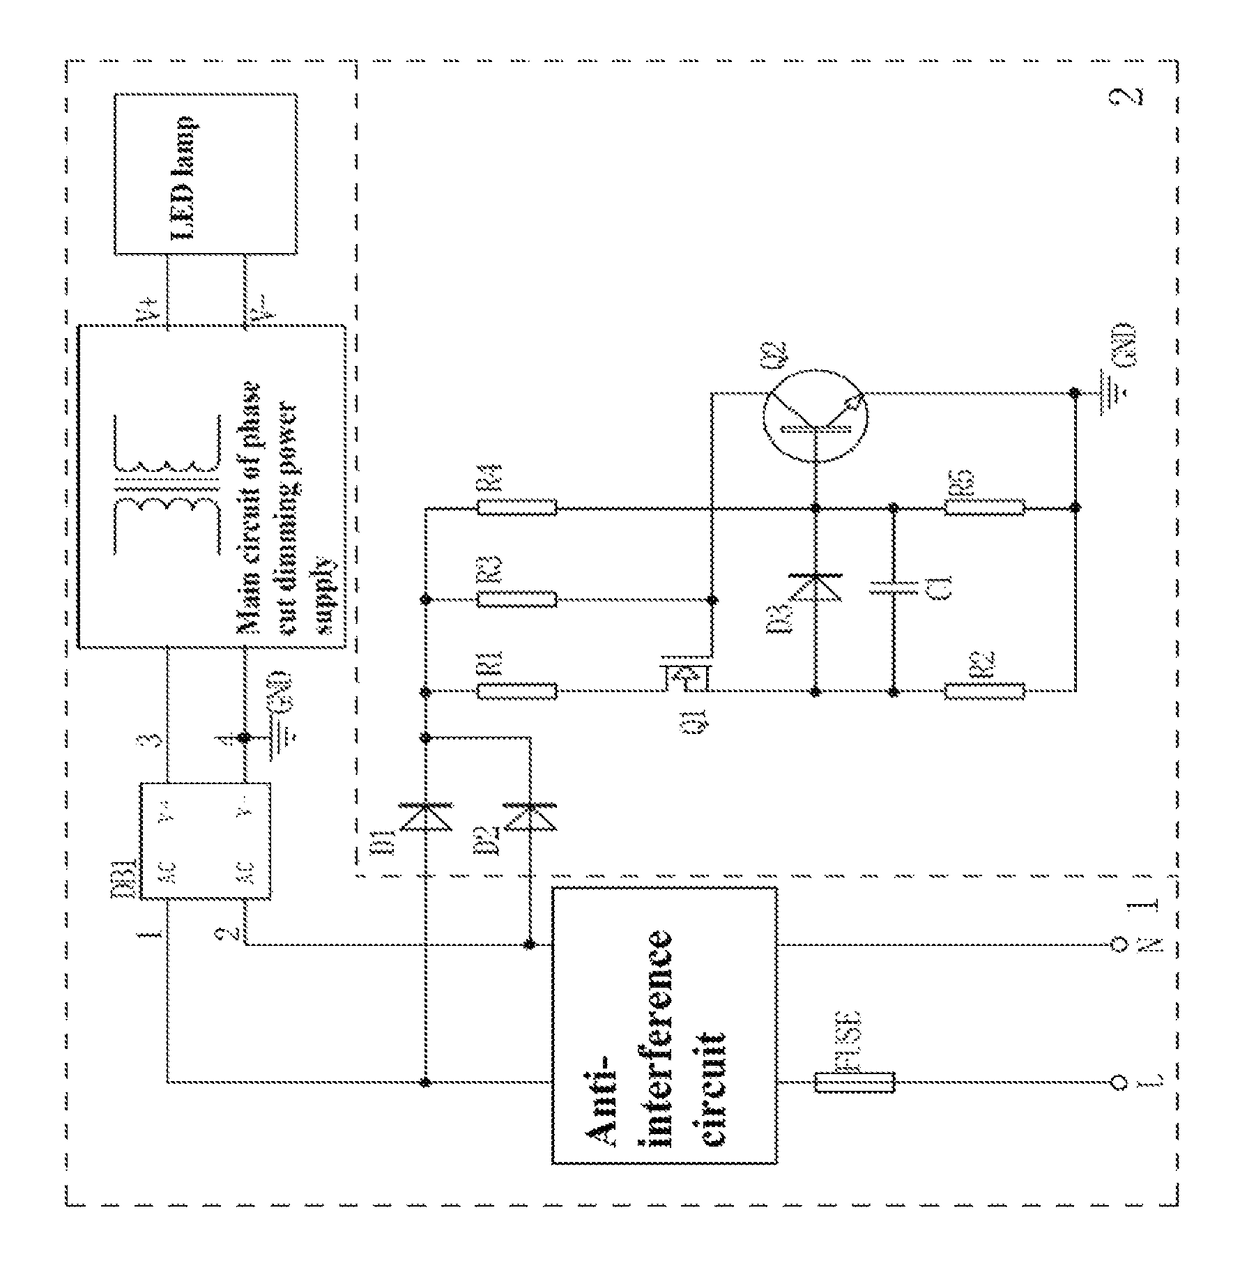 Dimmer holding current control circuit for phase cut dimming power supply